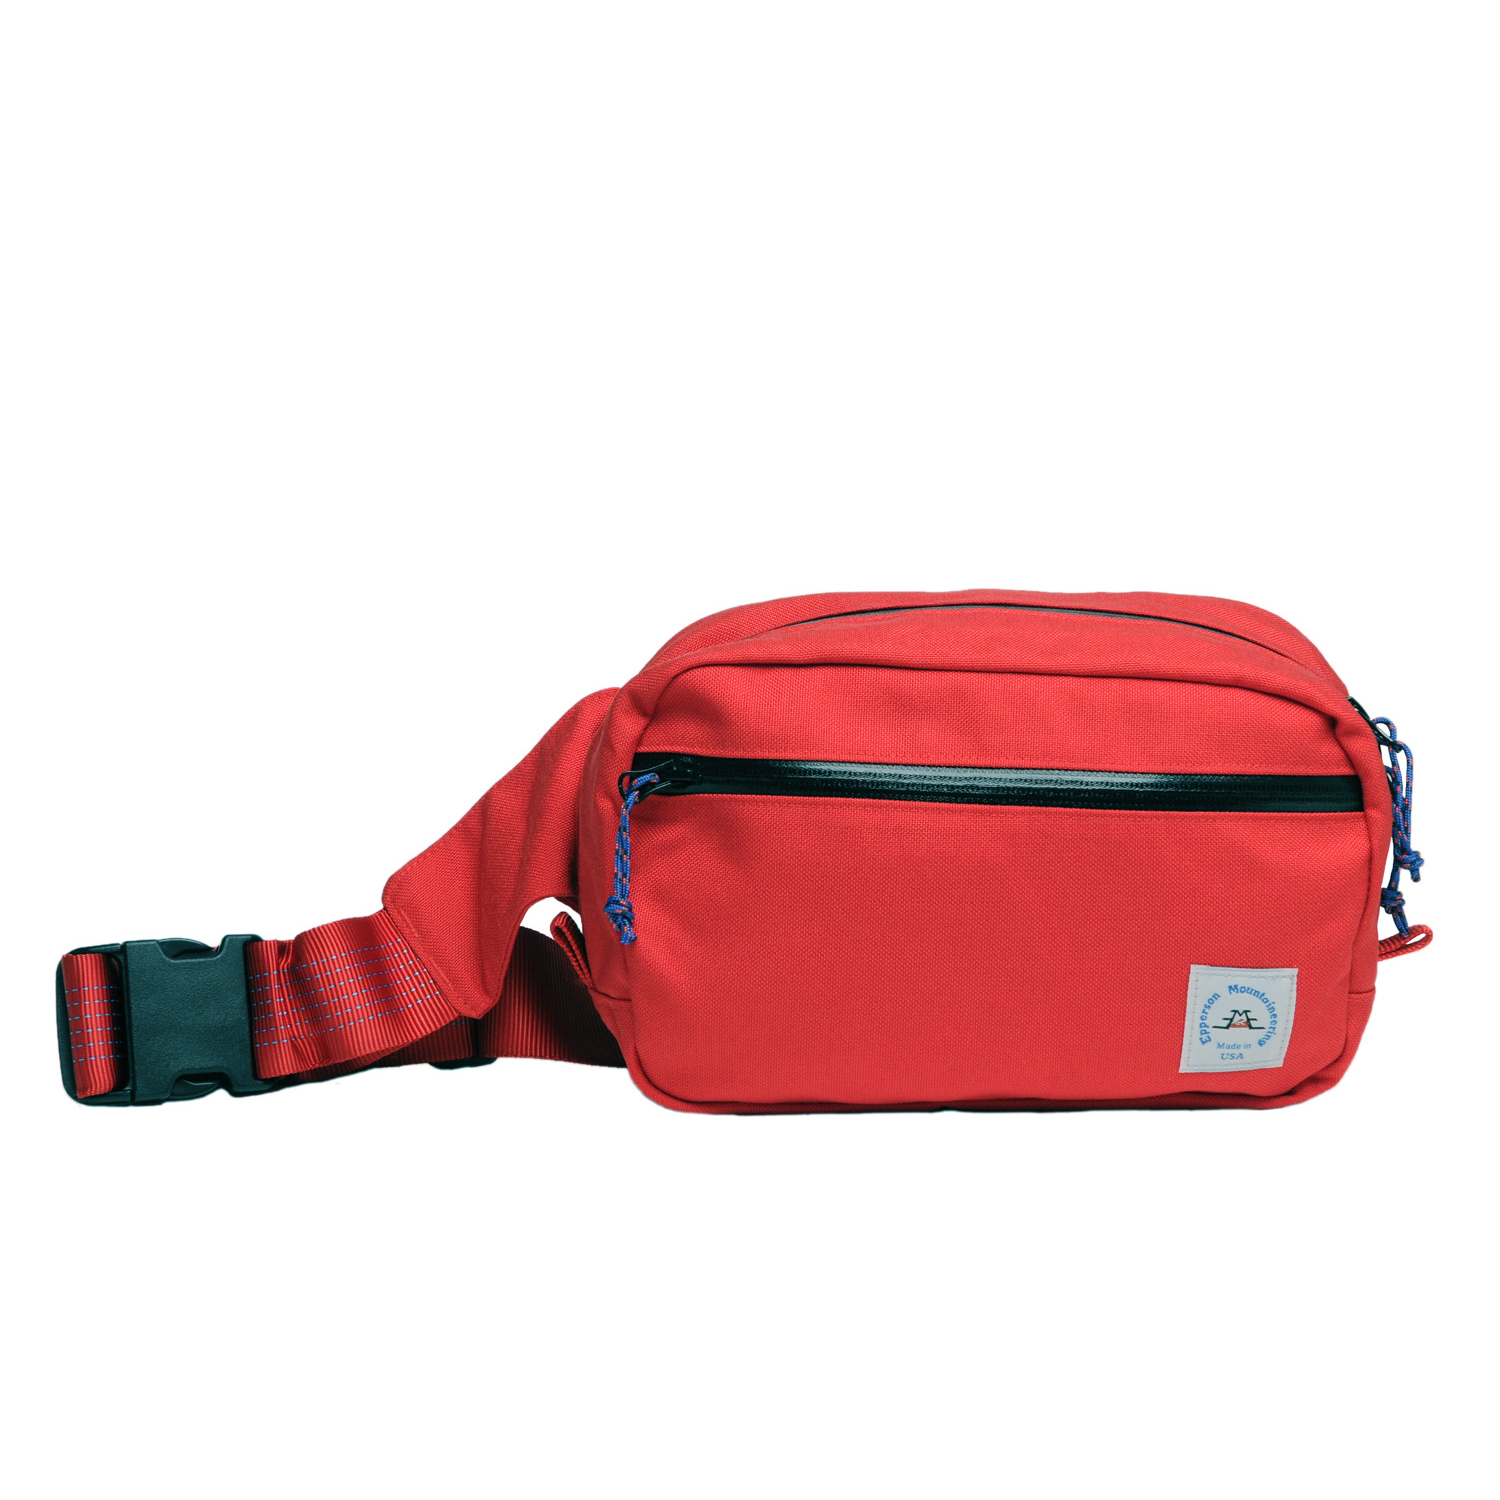 Shop Bag — Epperson Mountaineering